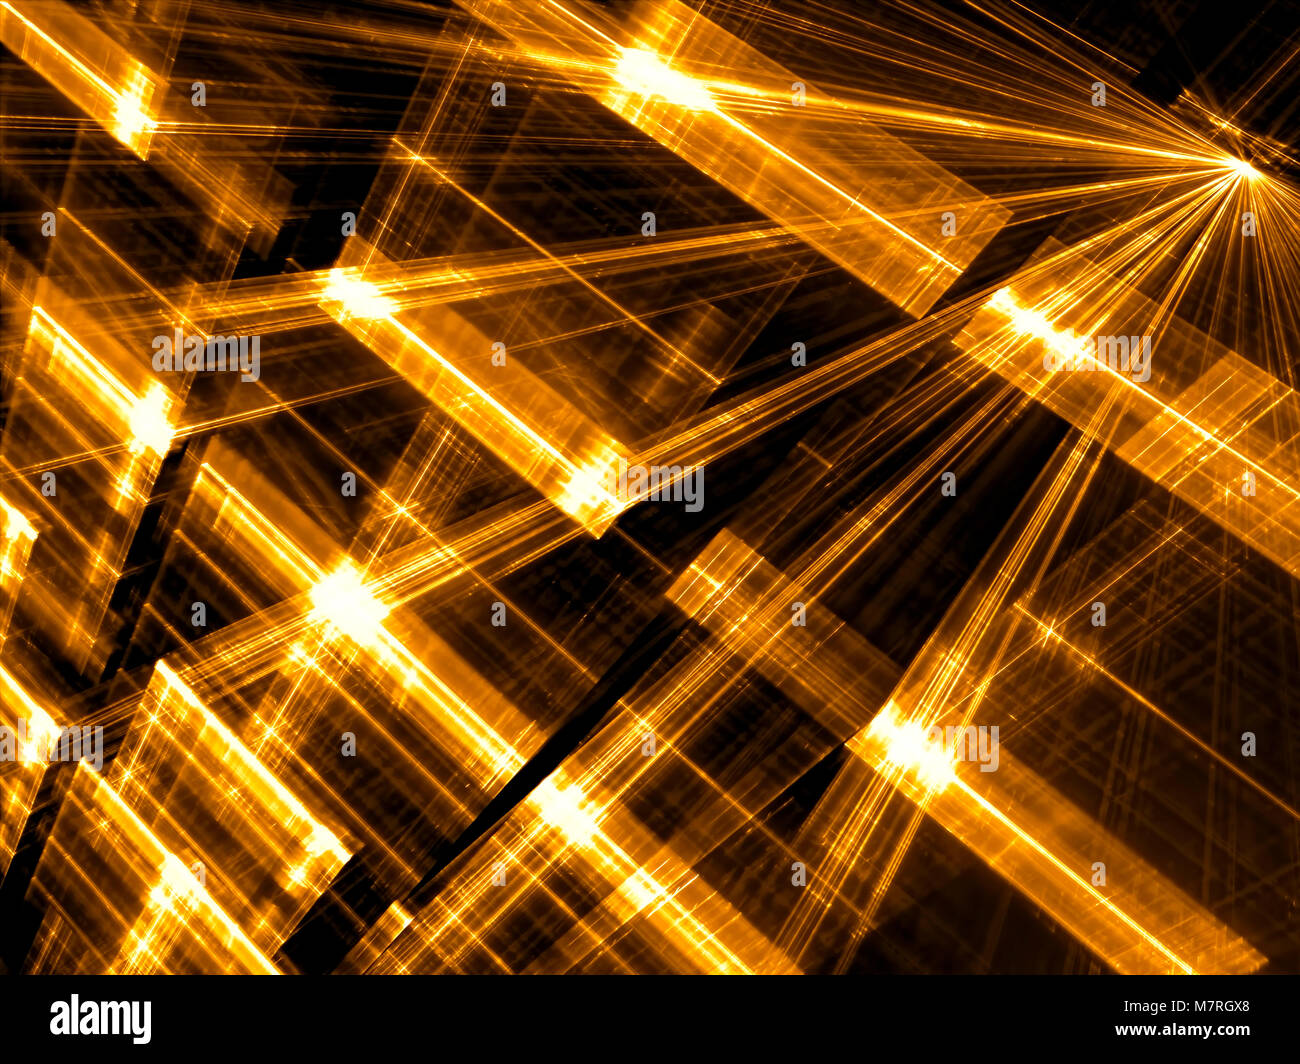 Lights wall - abstract digitally generated image Stock Photo